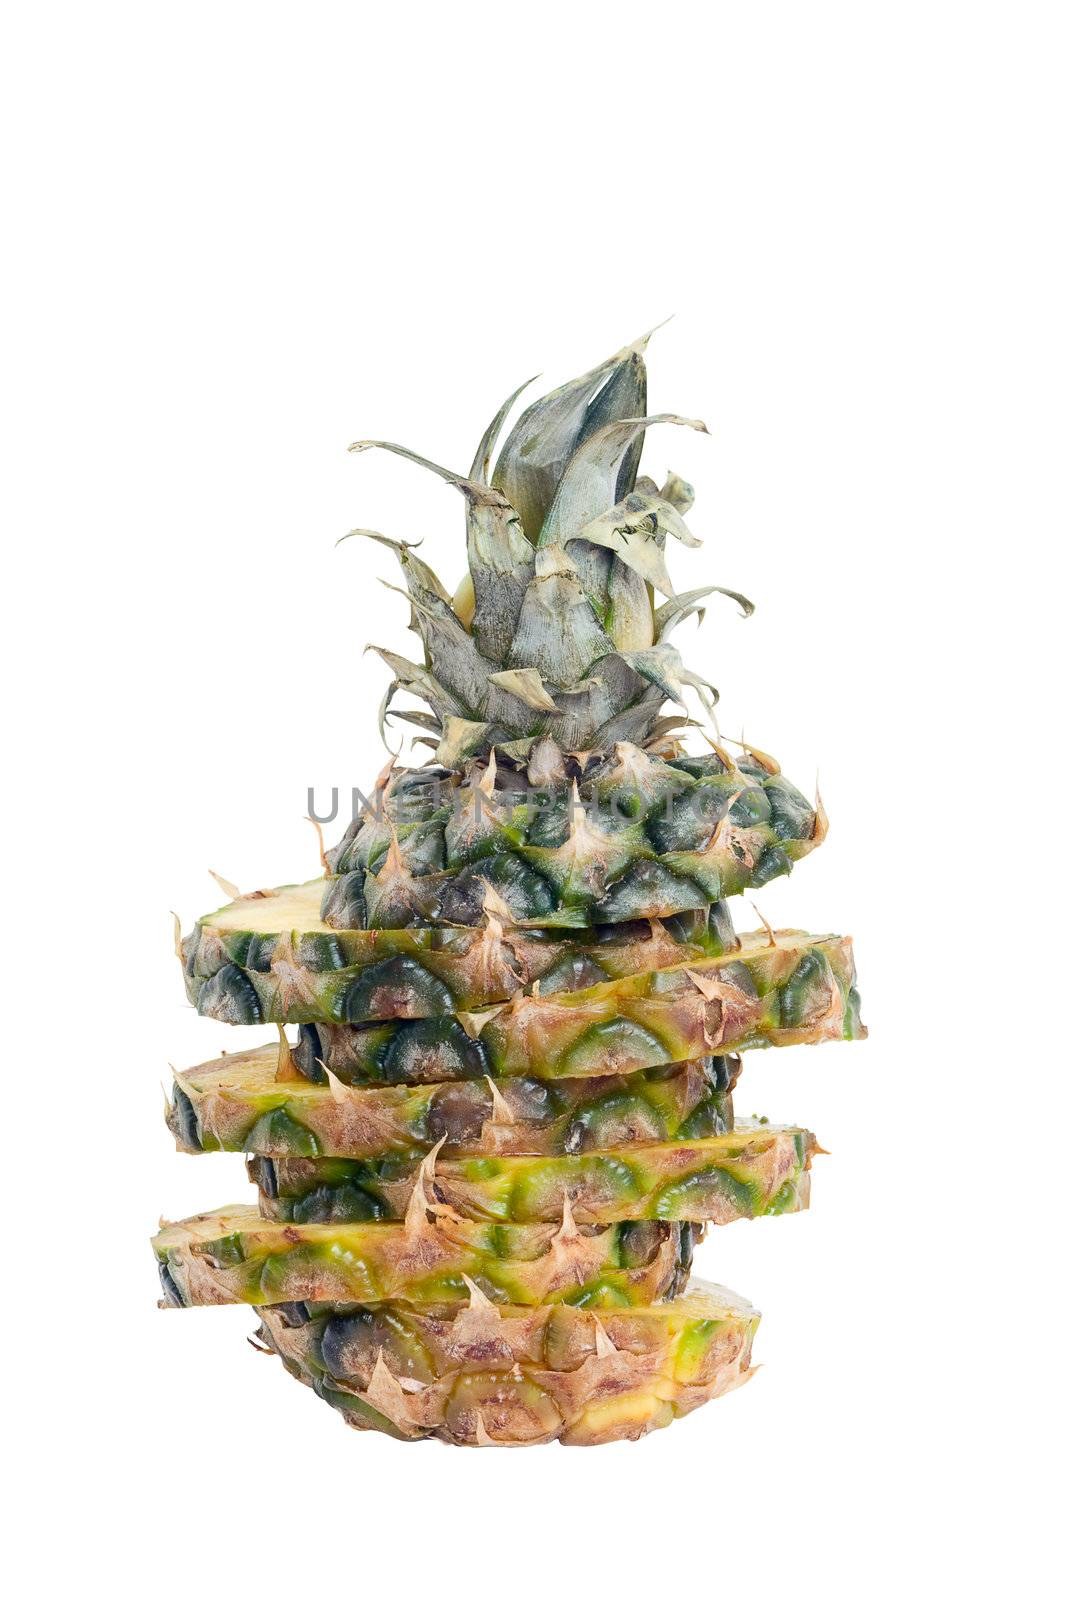 Pineapple, cut into slices, isolated on a white background.